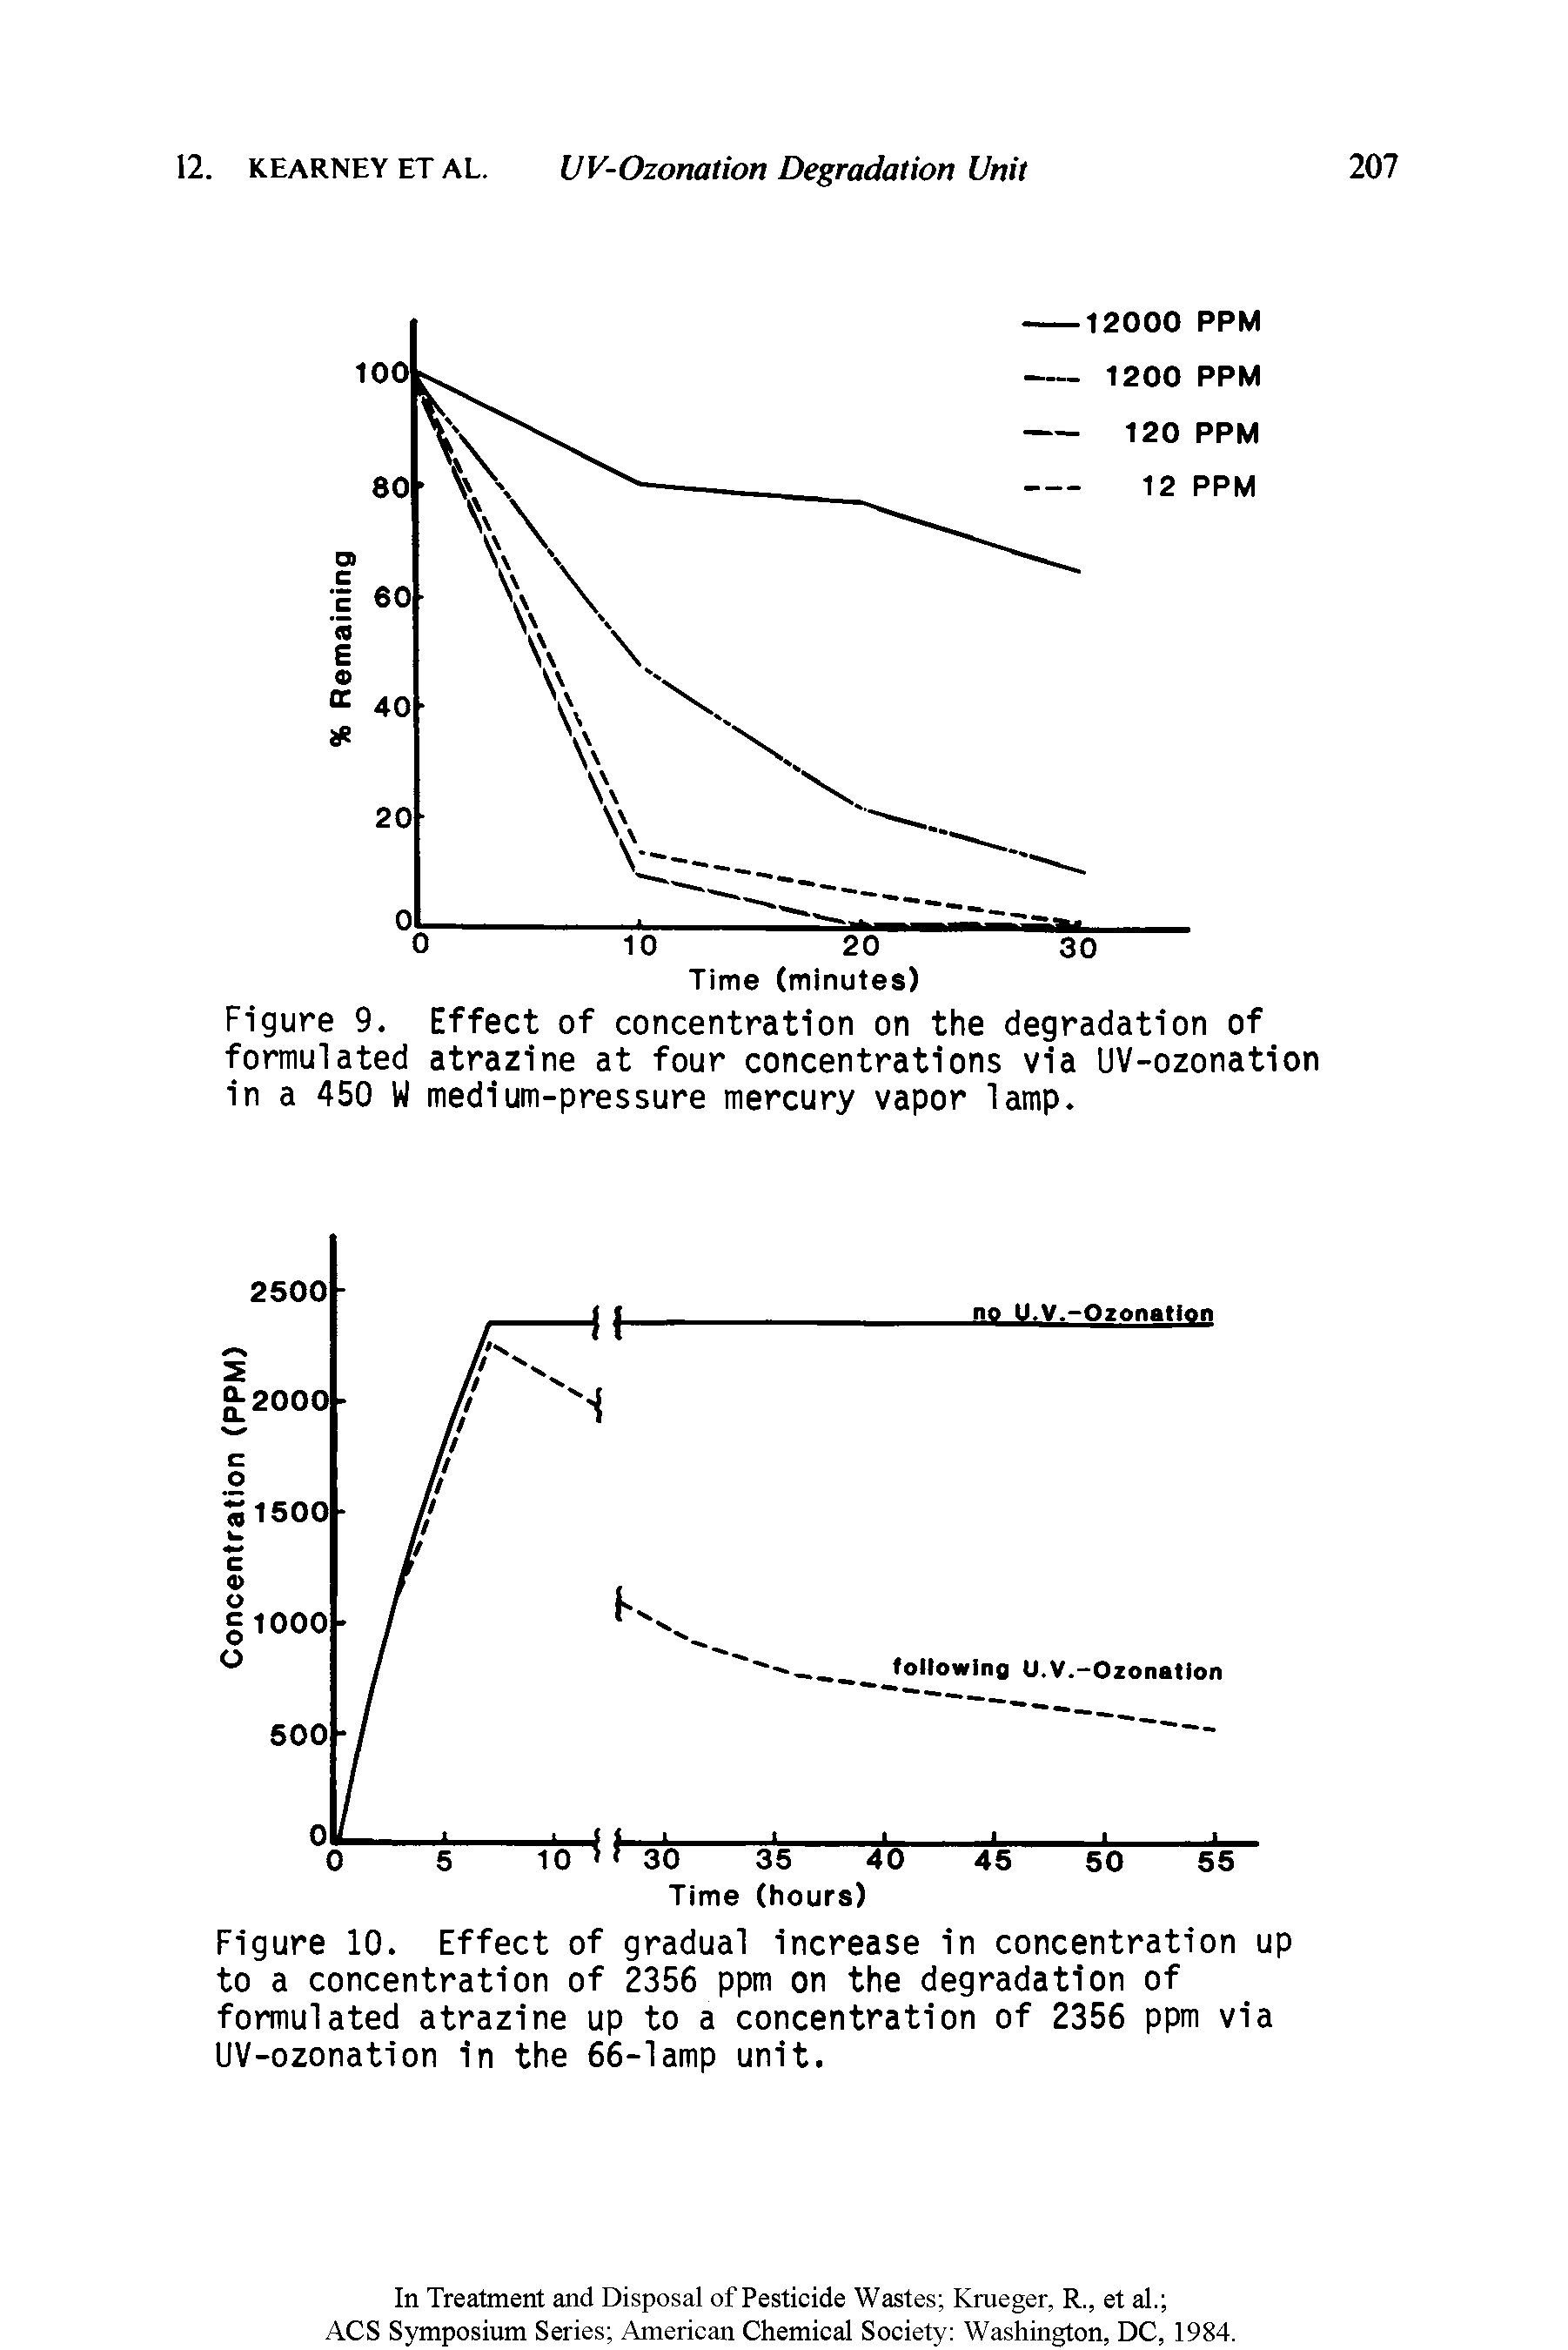 Figure 10. Effect of gradual increase in concentration up to a concentration of 2356 ppm on the degradation of formulated atrazine up to a concentration of 2356 ppm via UV-ozonation in the 66-lamp unit.